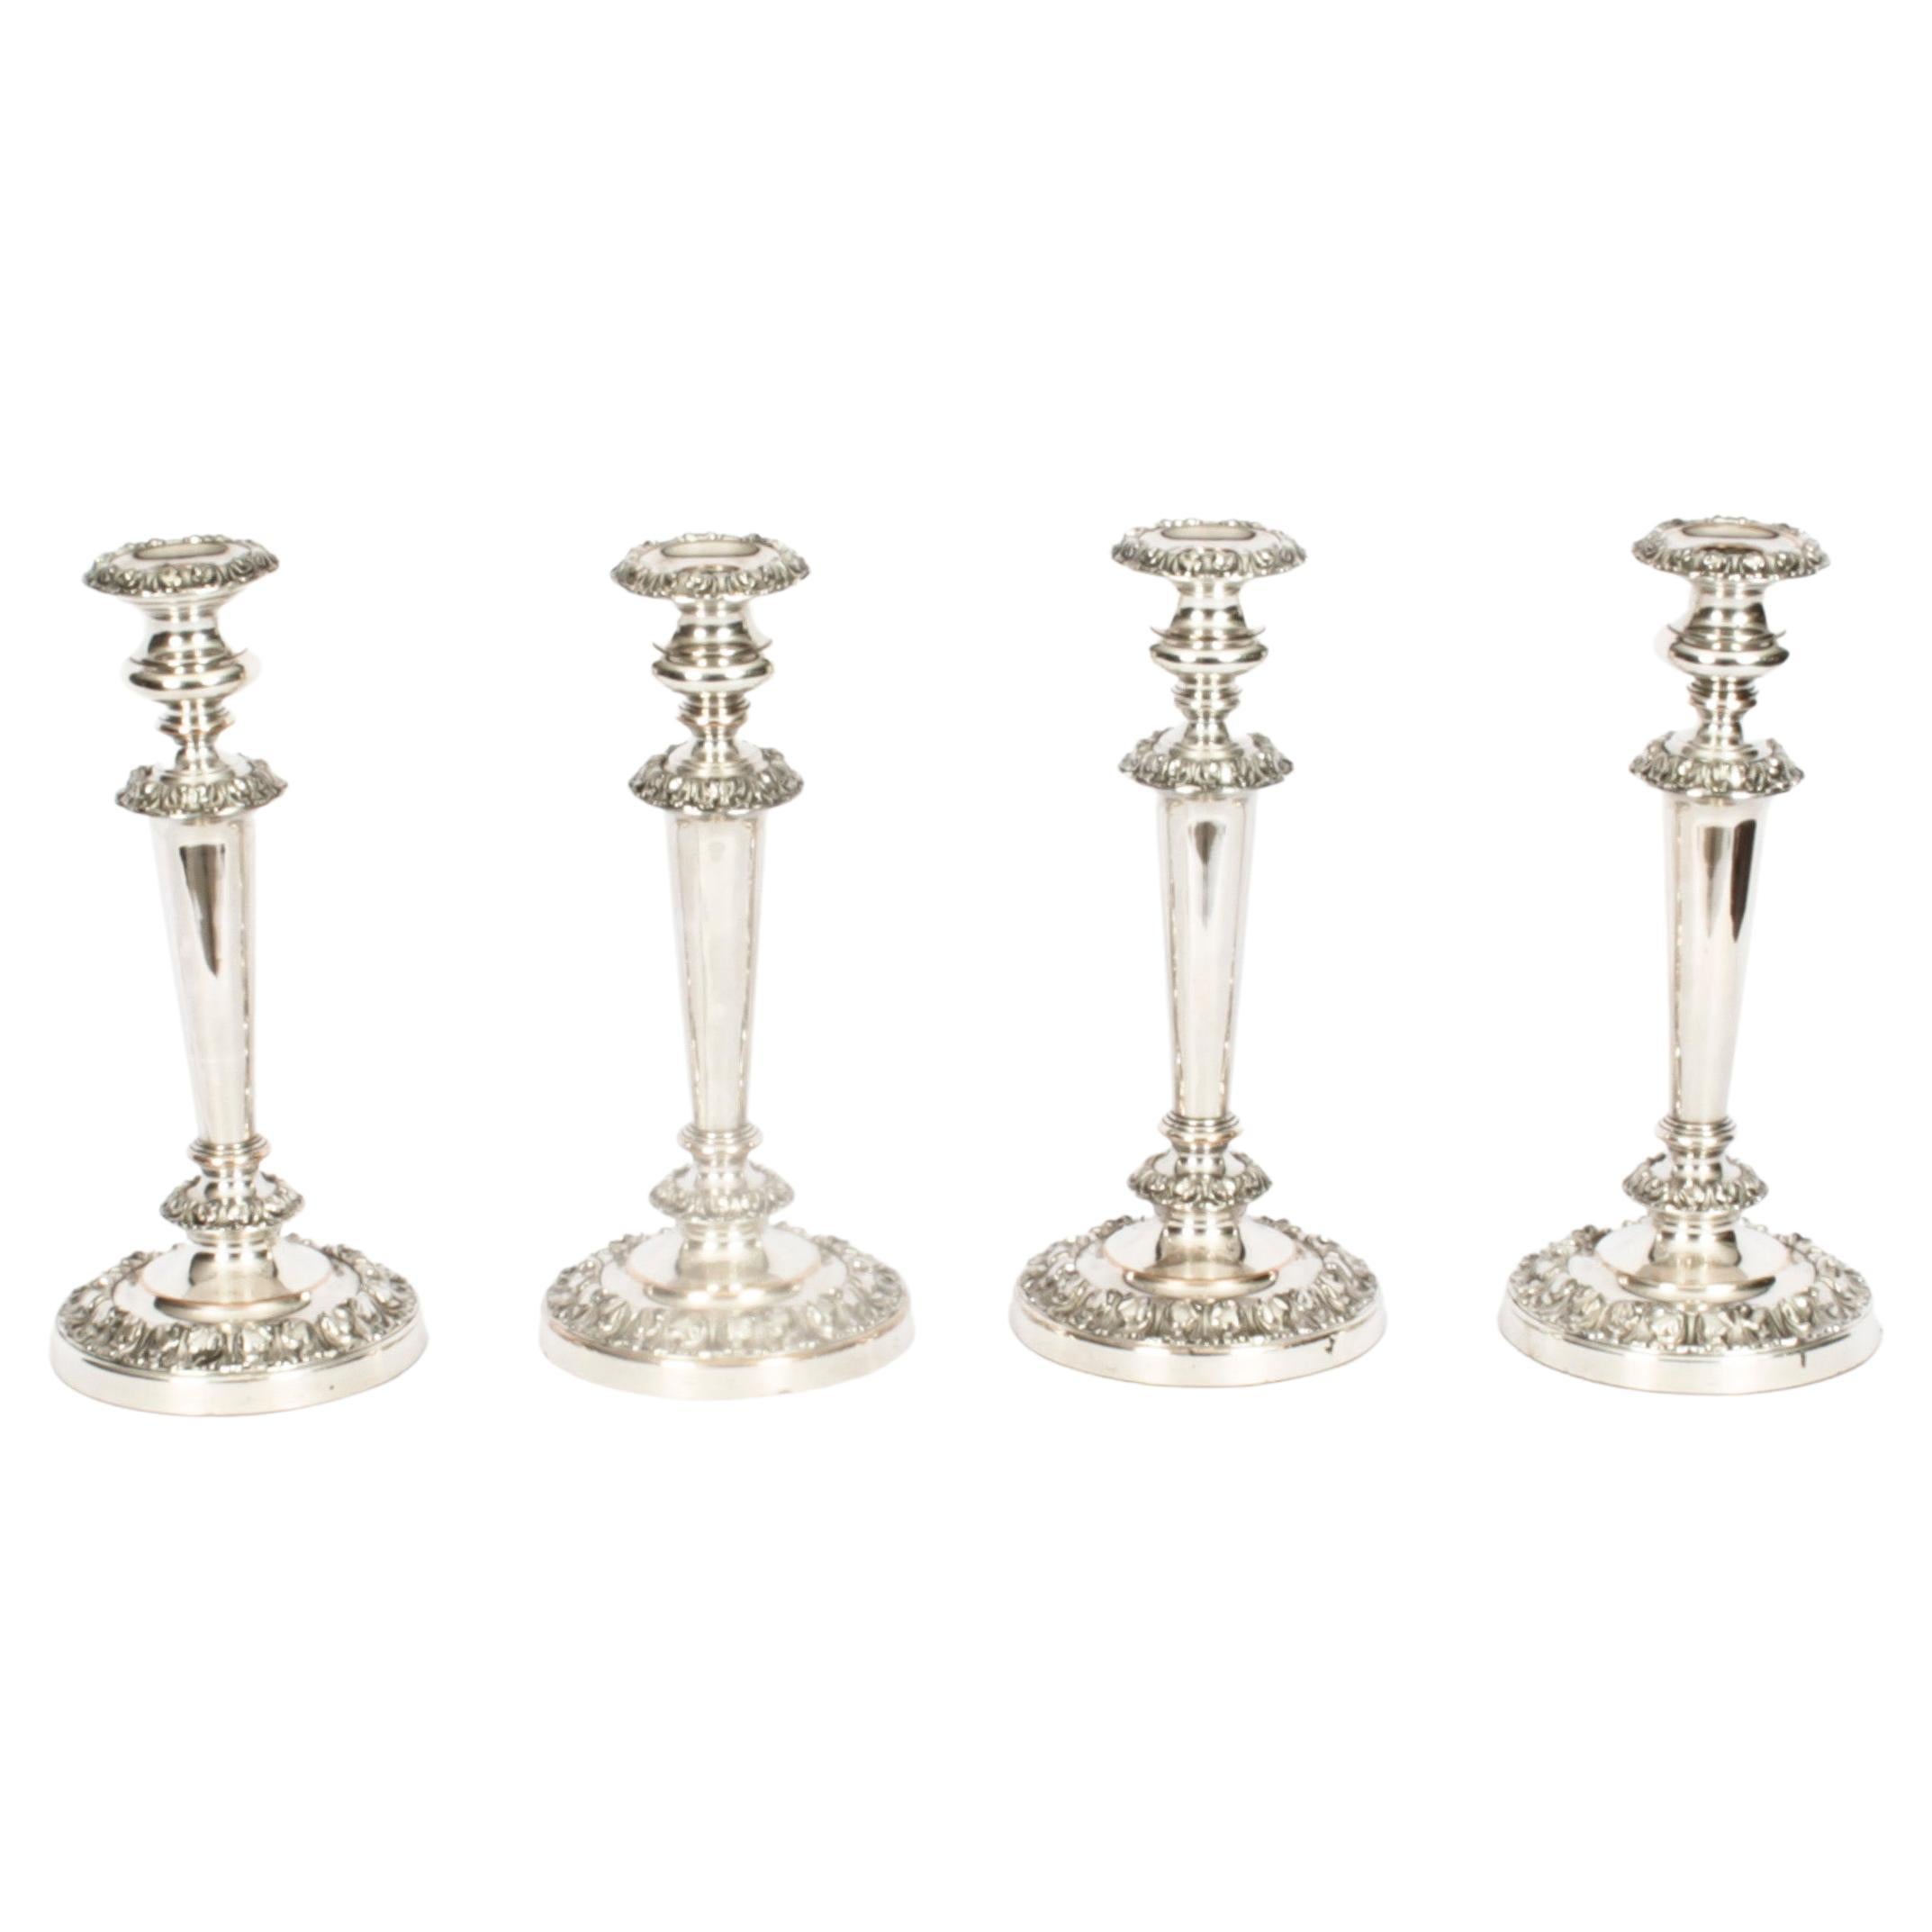 Antique Set 4 Old Sheffield Silver Plated Candlesticks 19th Century